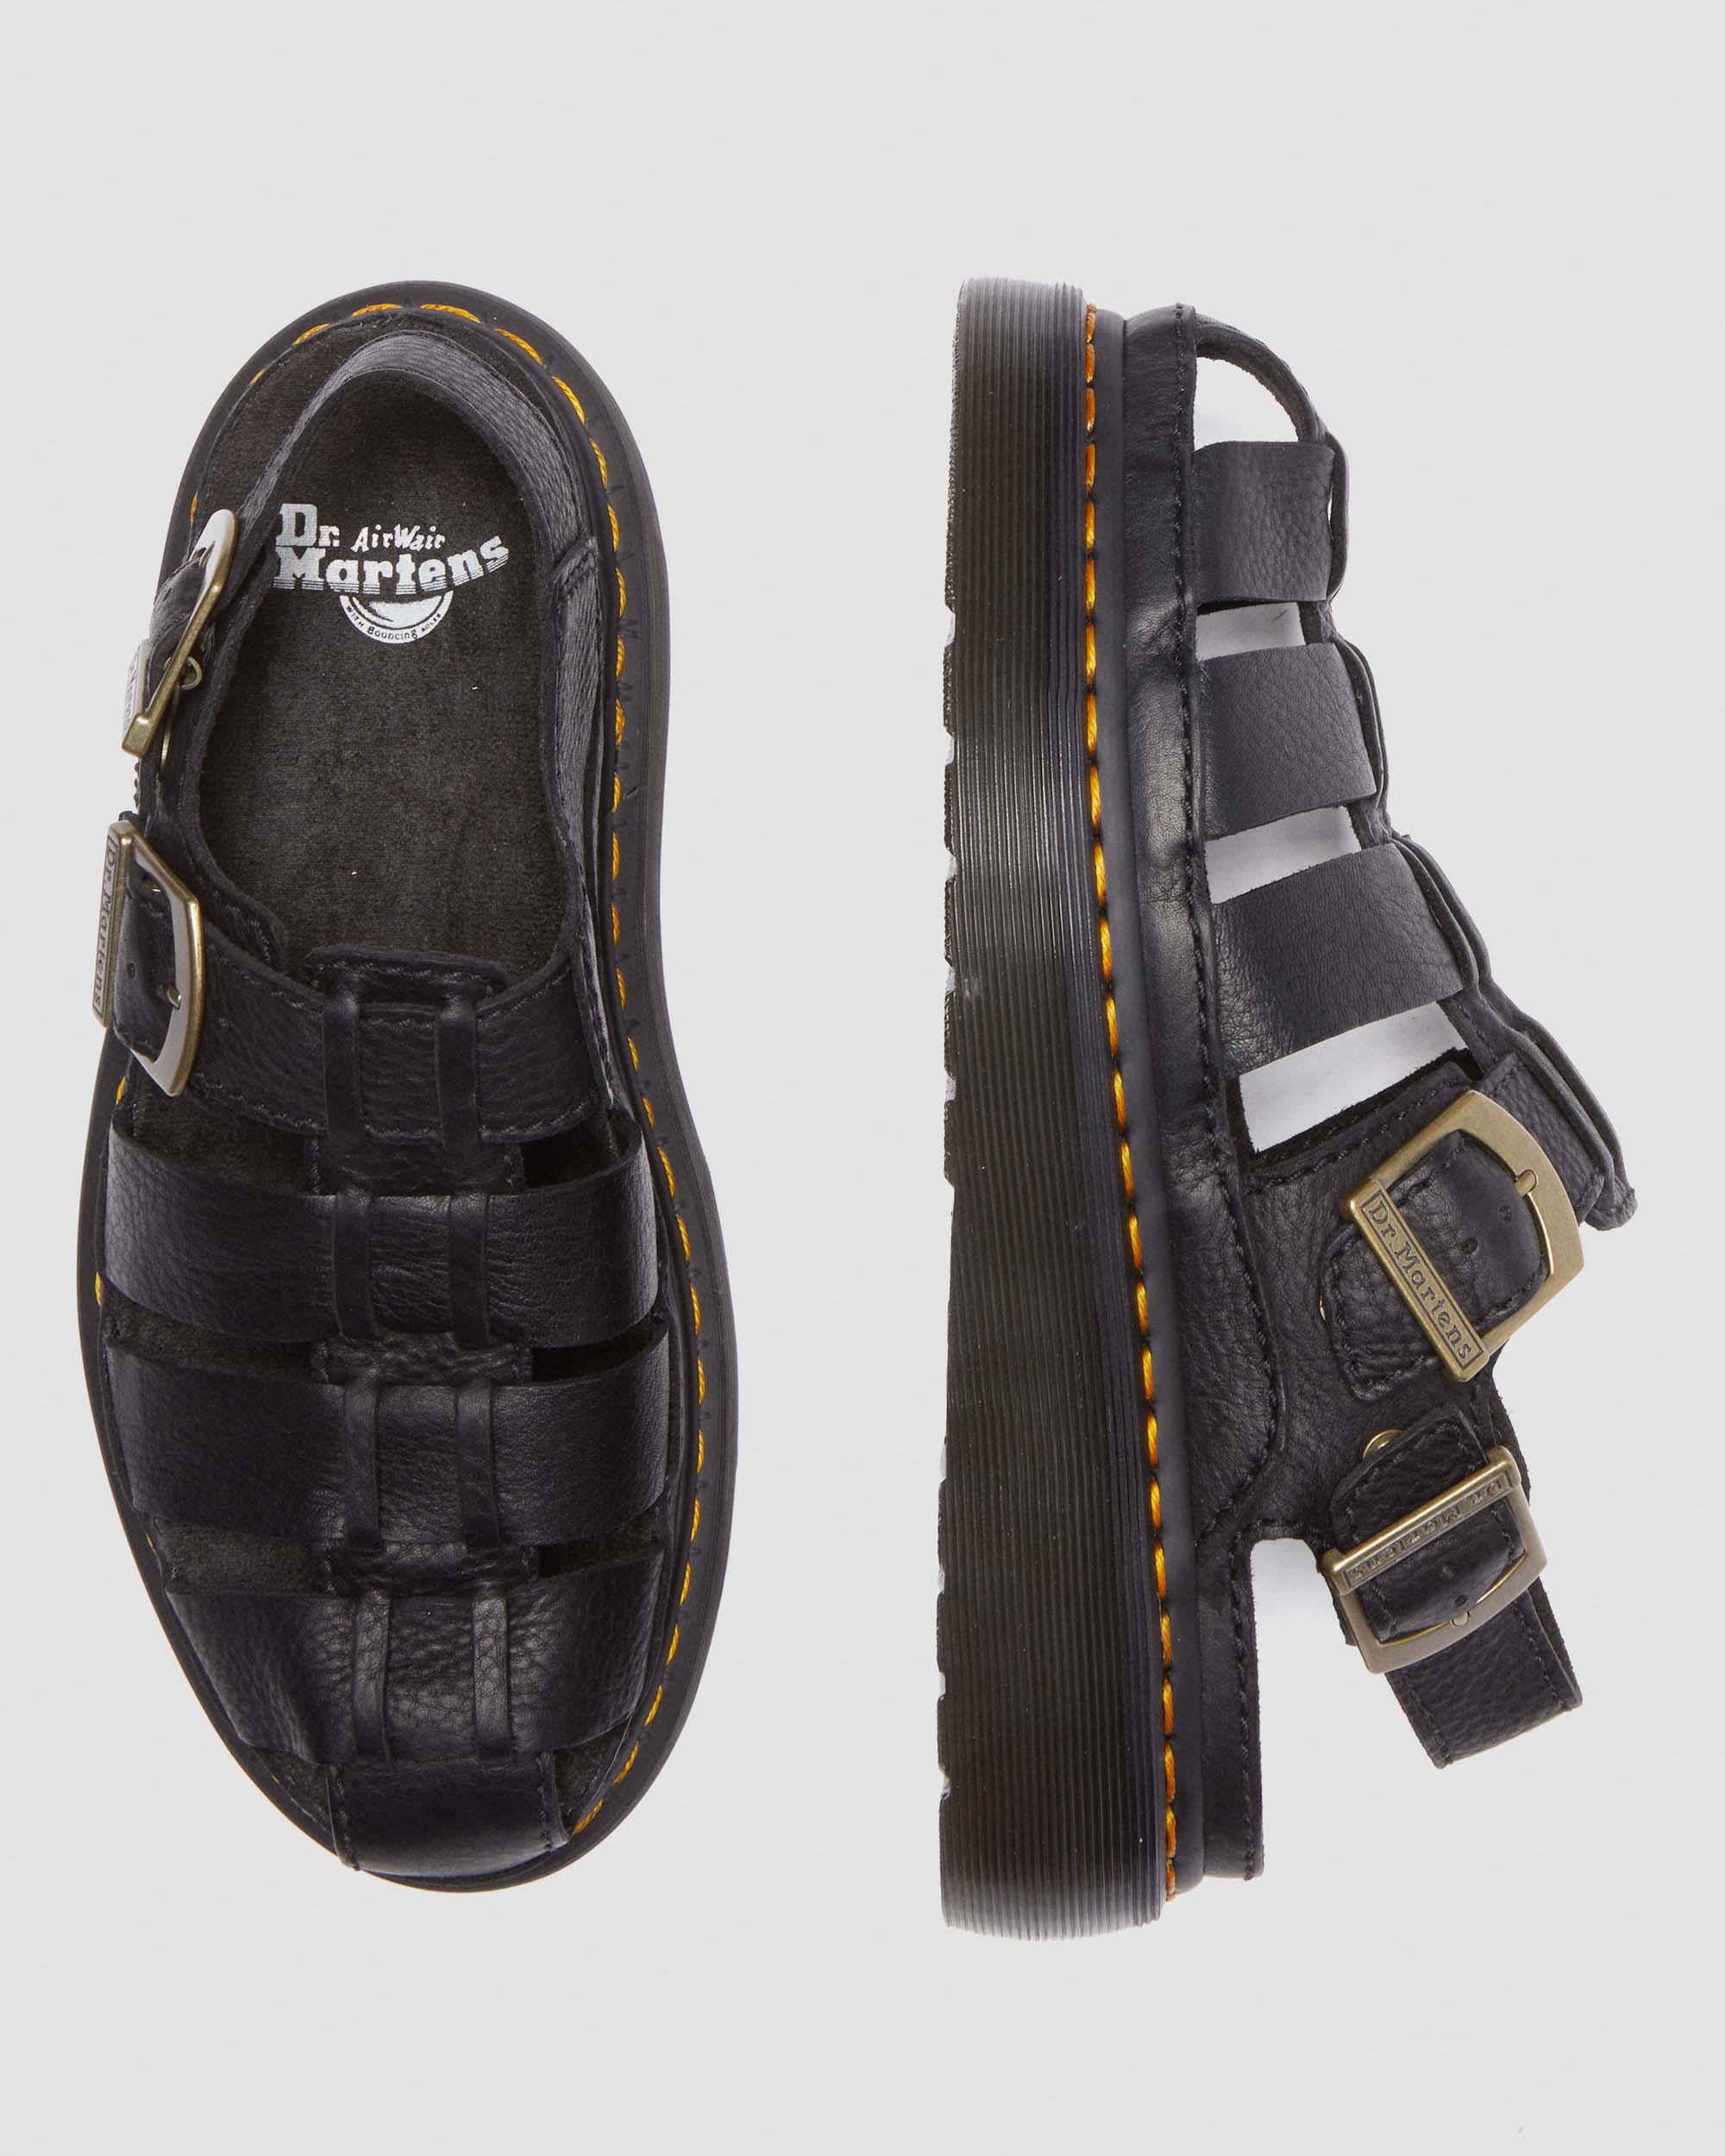 Wrenlie Grizzly Leather Fisherman Sandals in Black